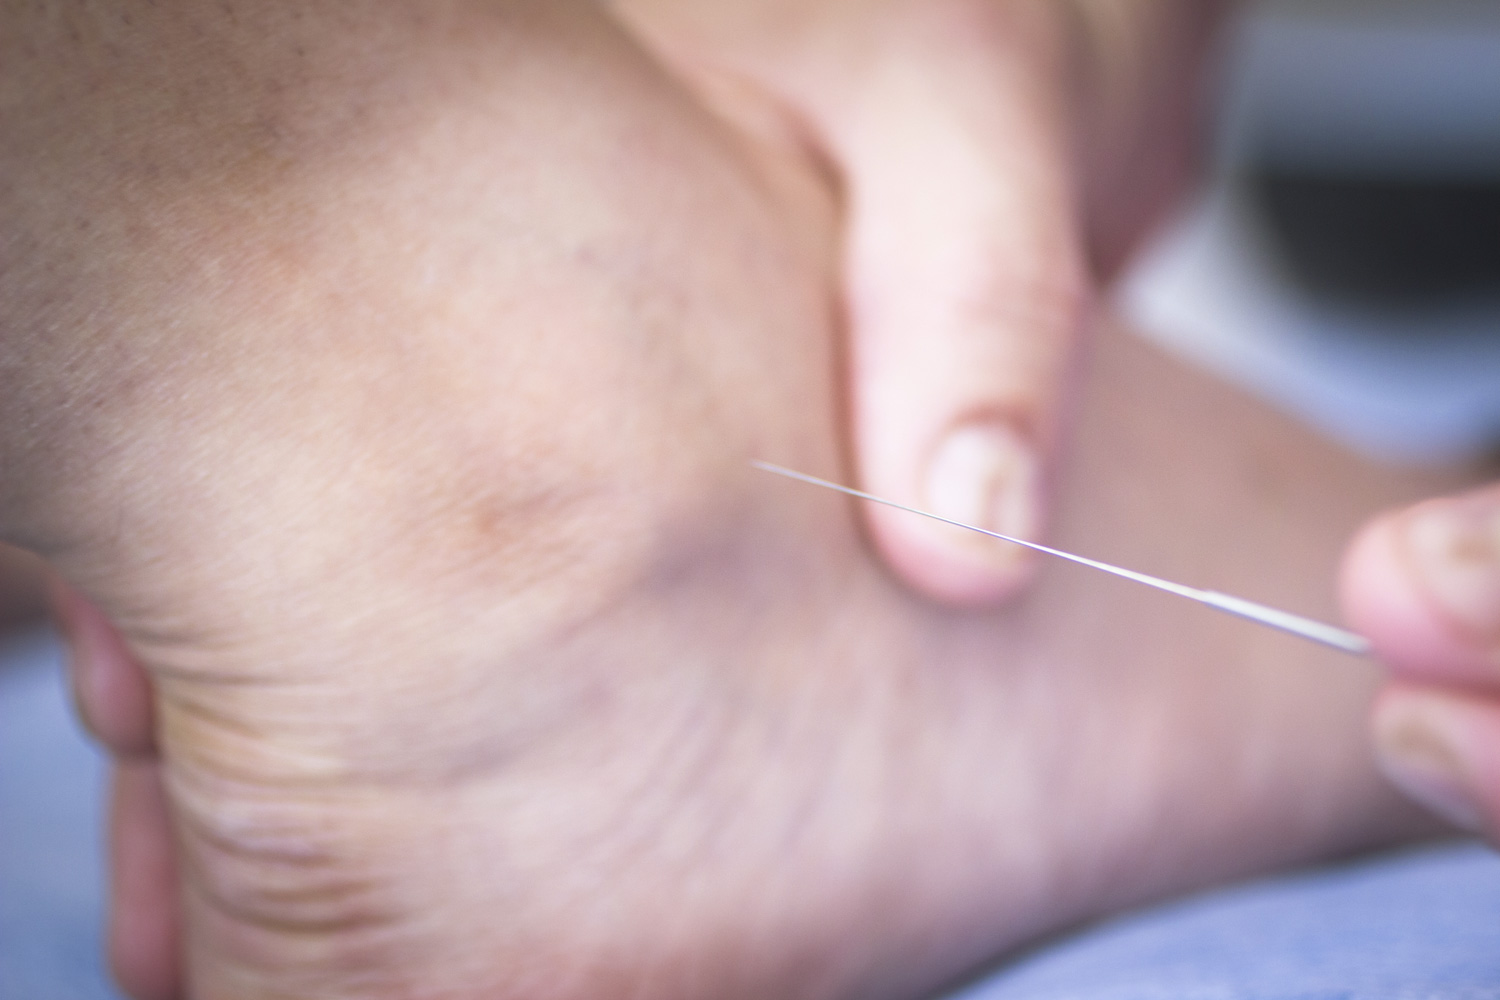 Dry needling treatment on a person's foot